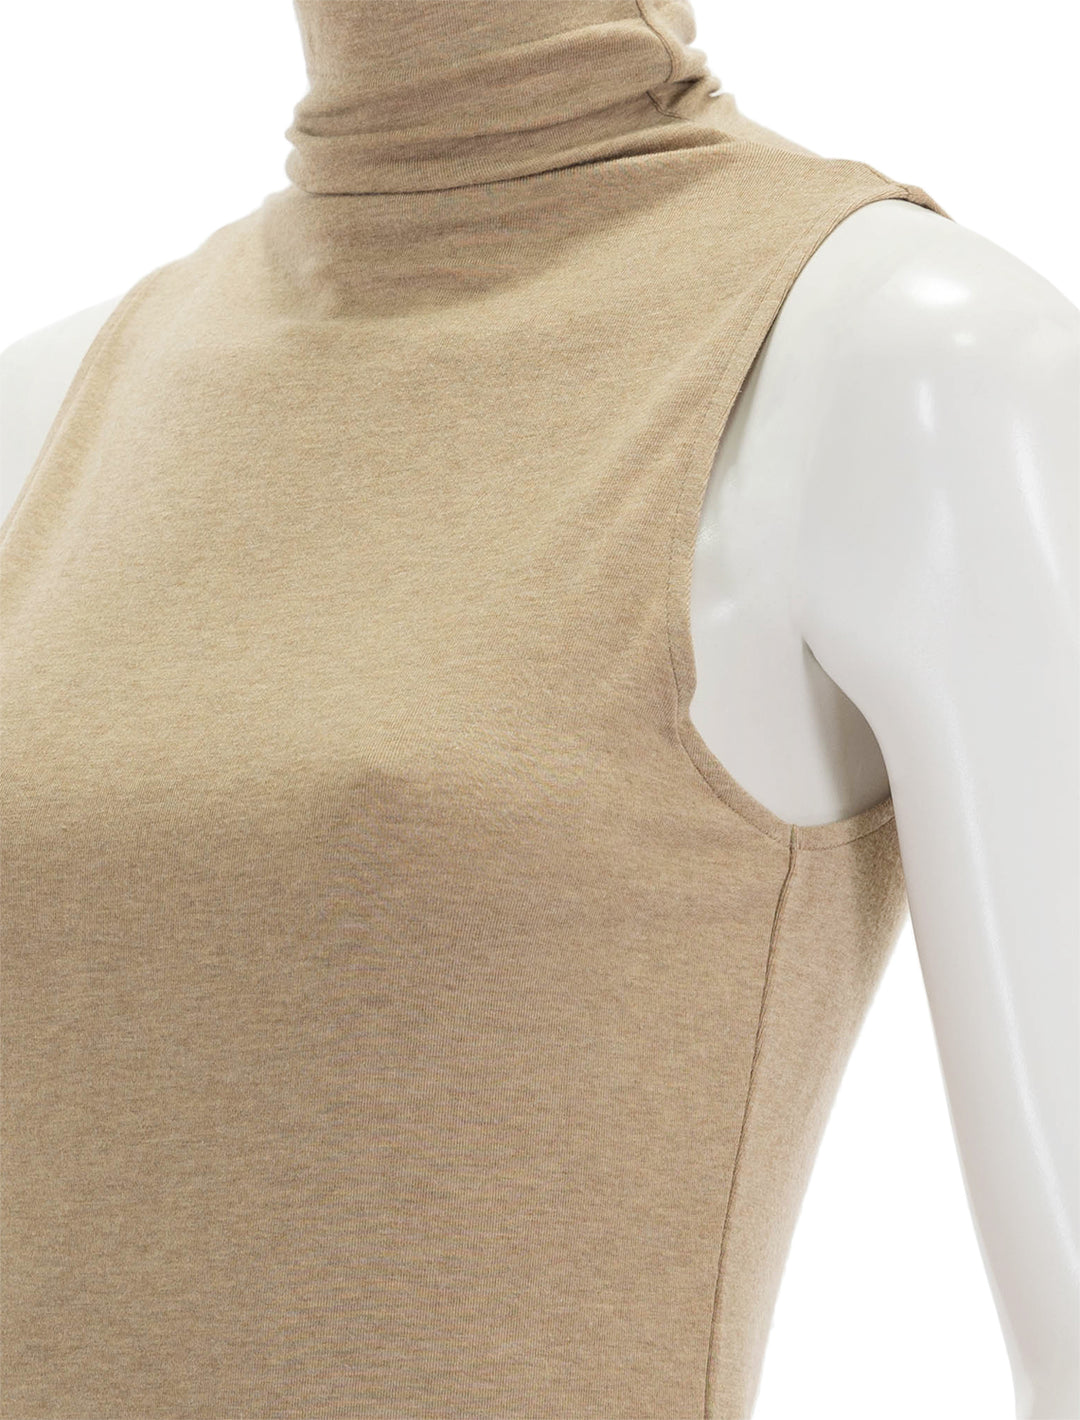 Close-up view of Vince's sleeveless turtleneck in cashew.